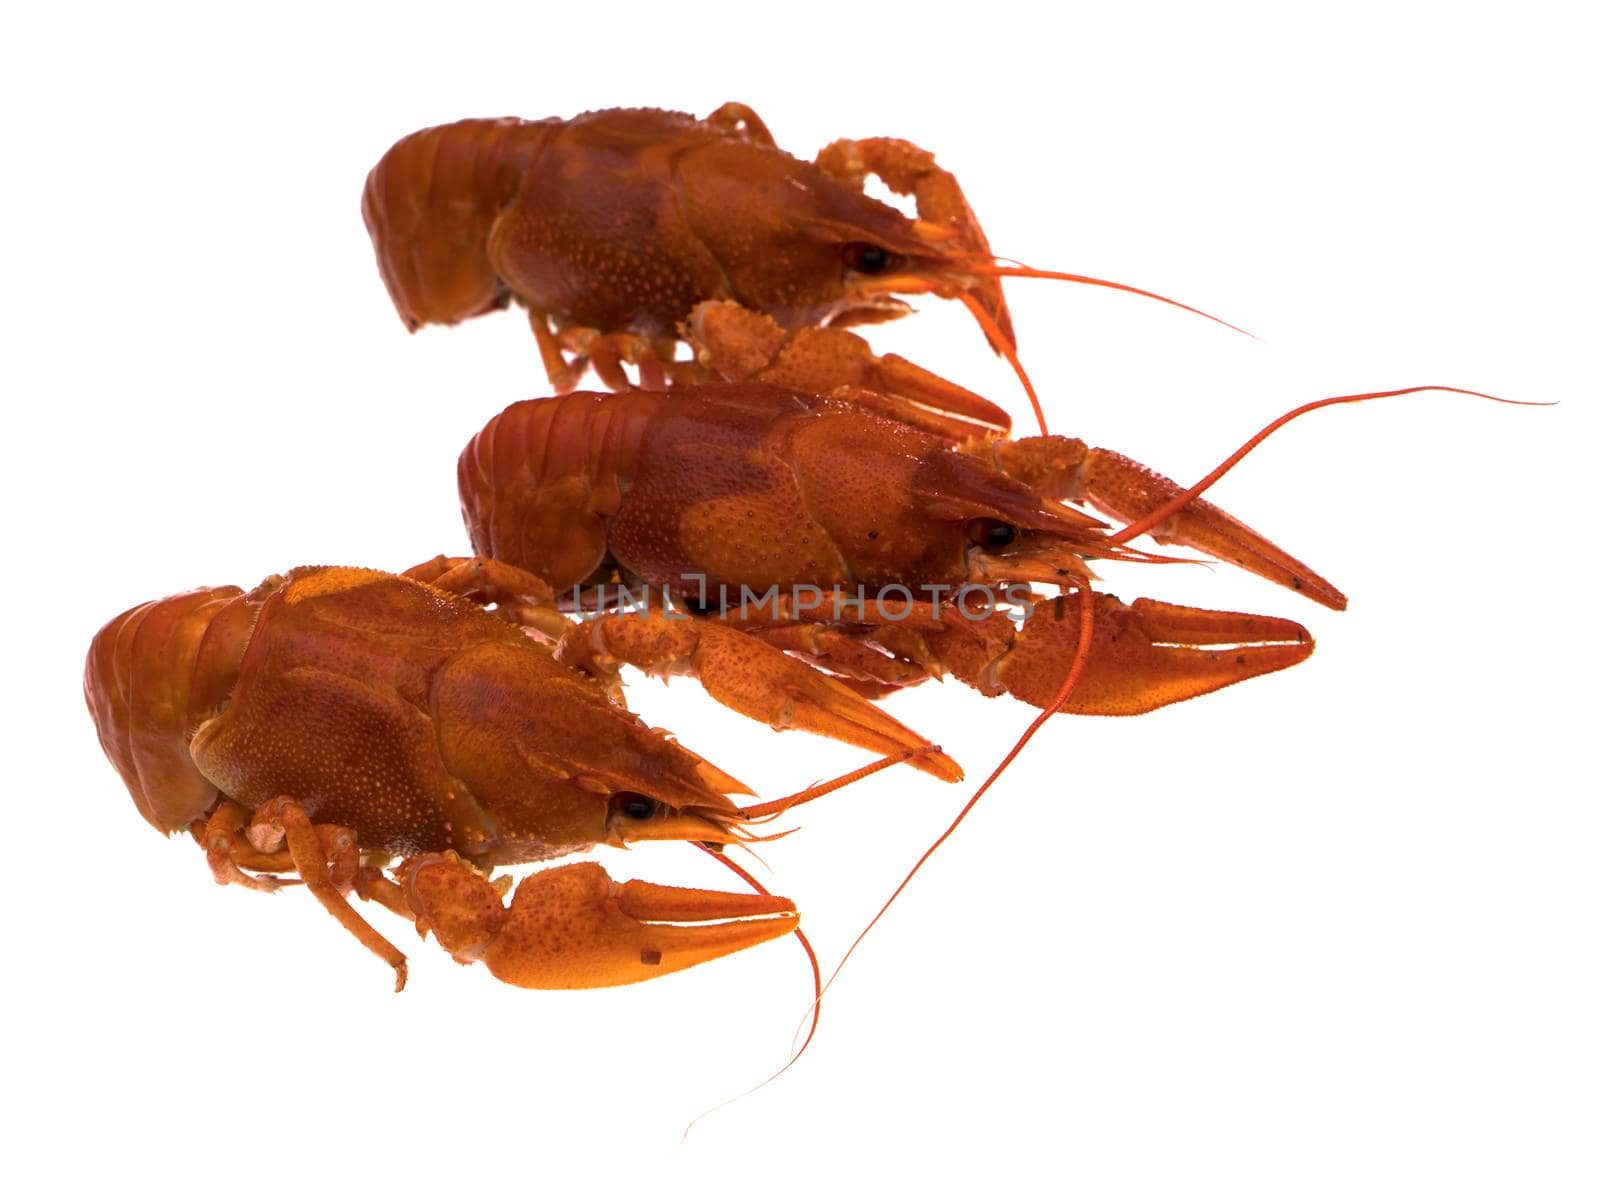 Red Crayfish, on a white background in isolation